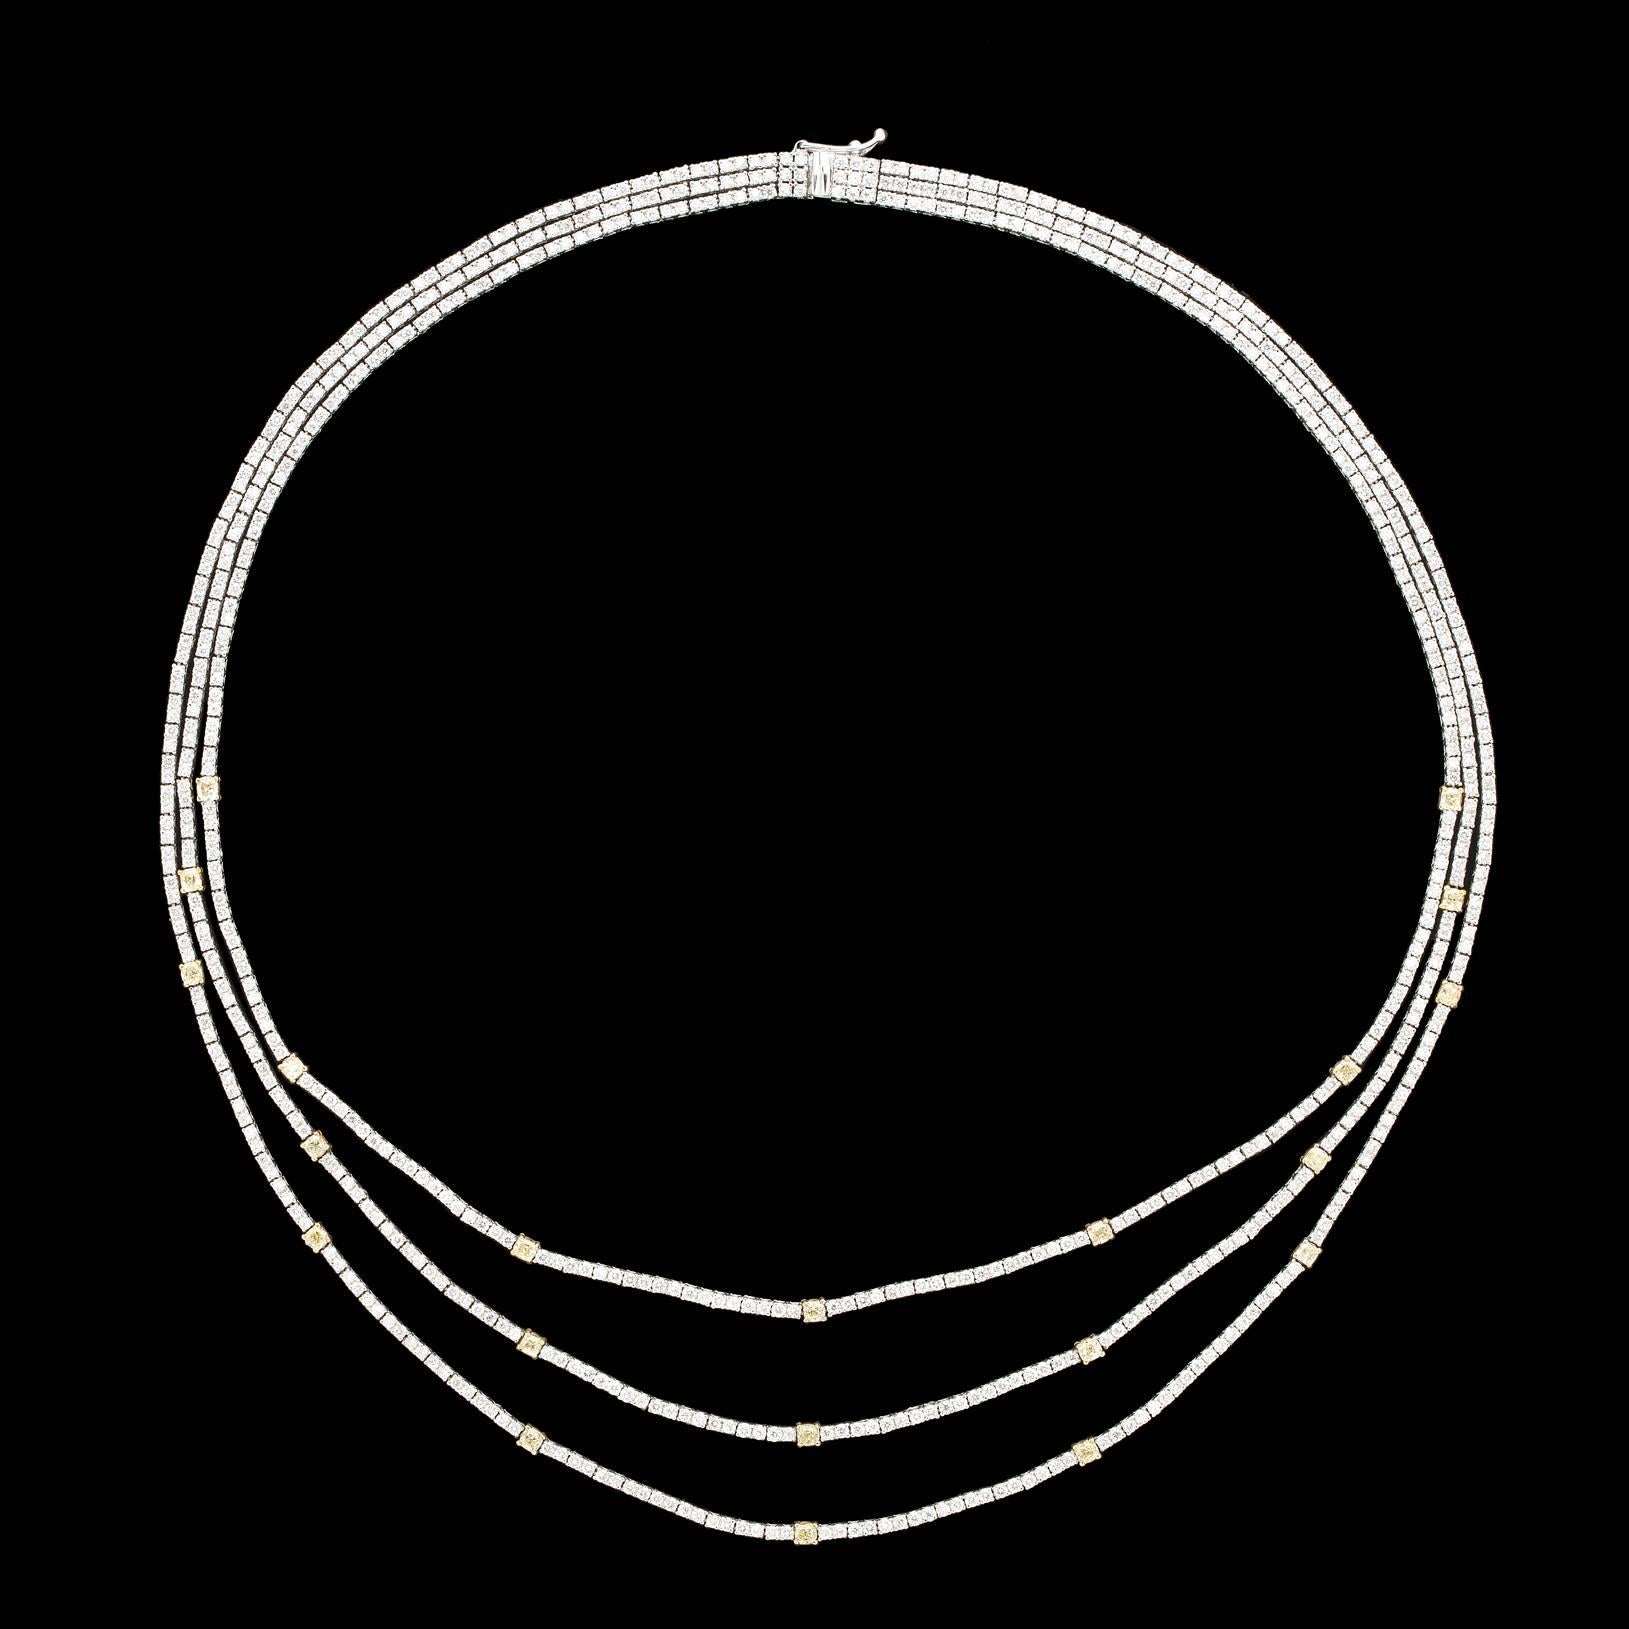 A stunning Salavetti Diamond Necklace Featuring Three 1.5mm to 2.5mm Strands of Round Brilliant Cut Colorless and Fancy Yellow Diamonds Set in 18Kt White and Yellow Gold. The piece is 19 inches long with an approximate total of 10.18 carats of